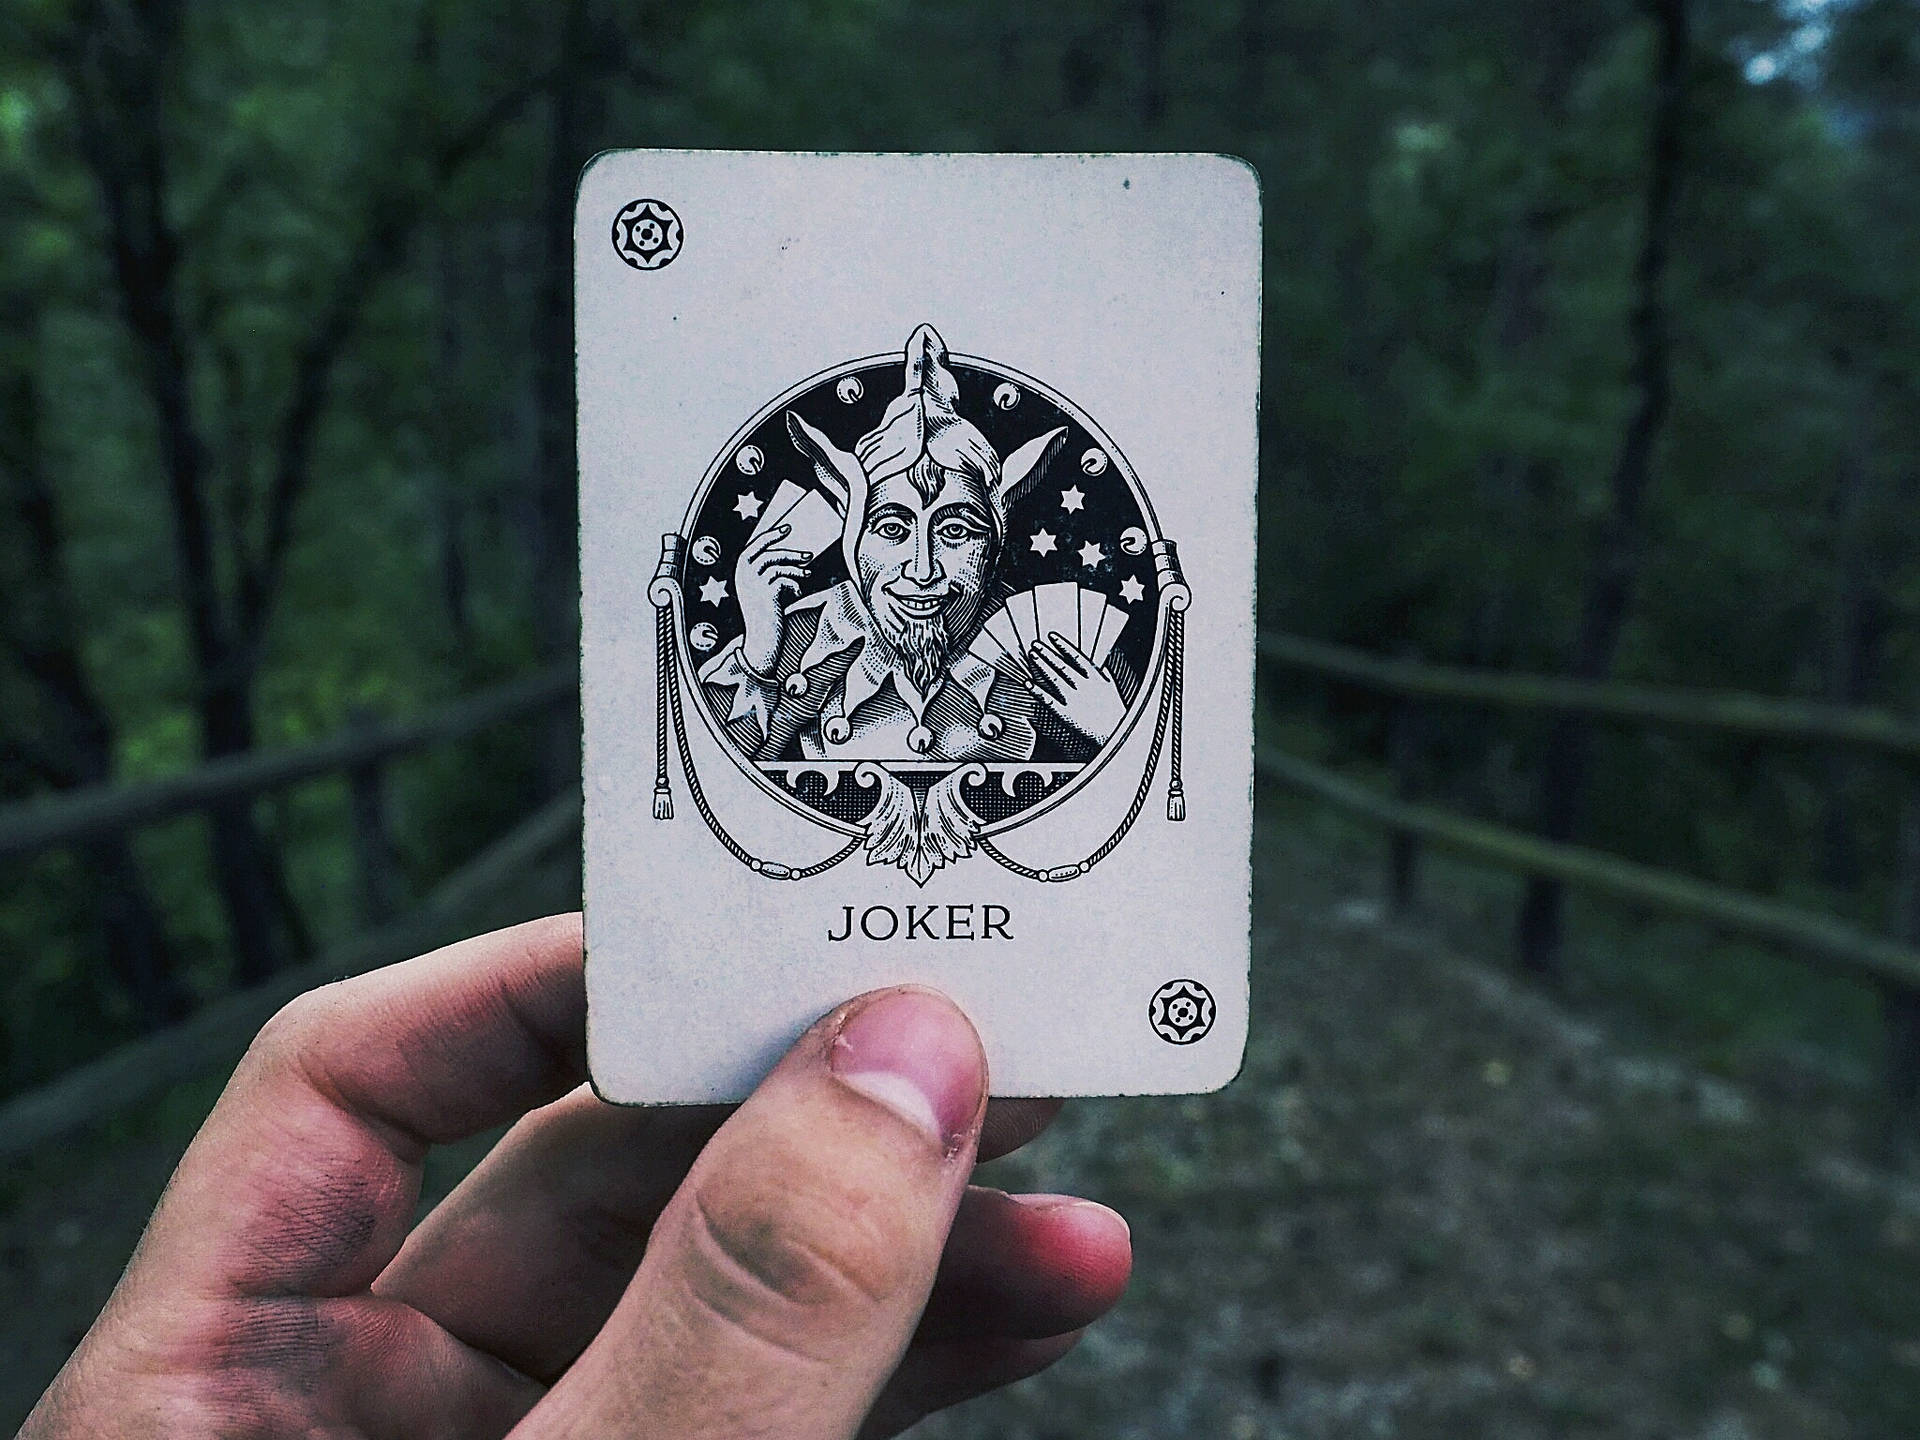 Hand holding a joker card in a blurred country road background. 